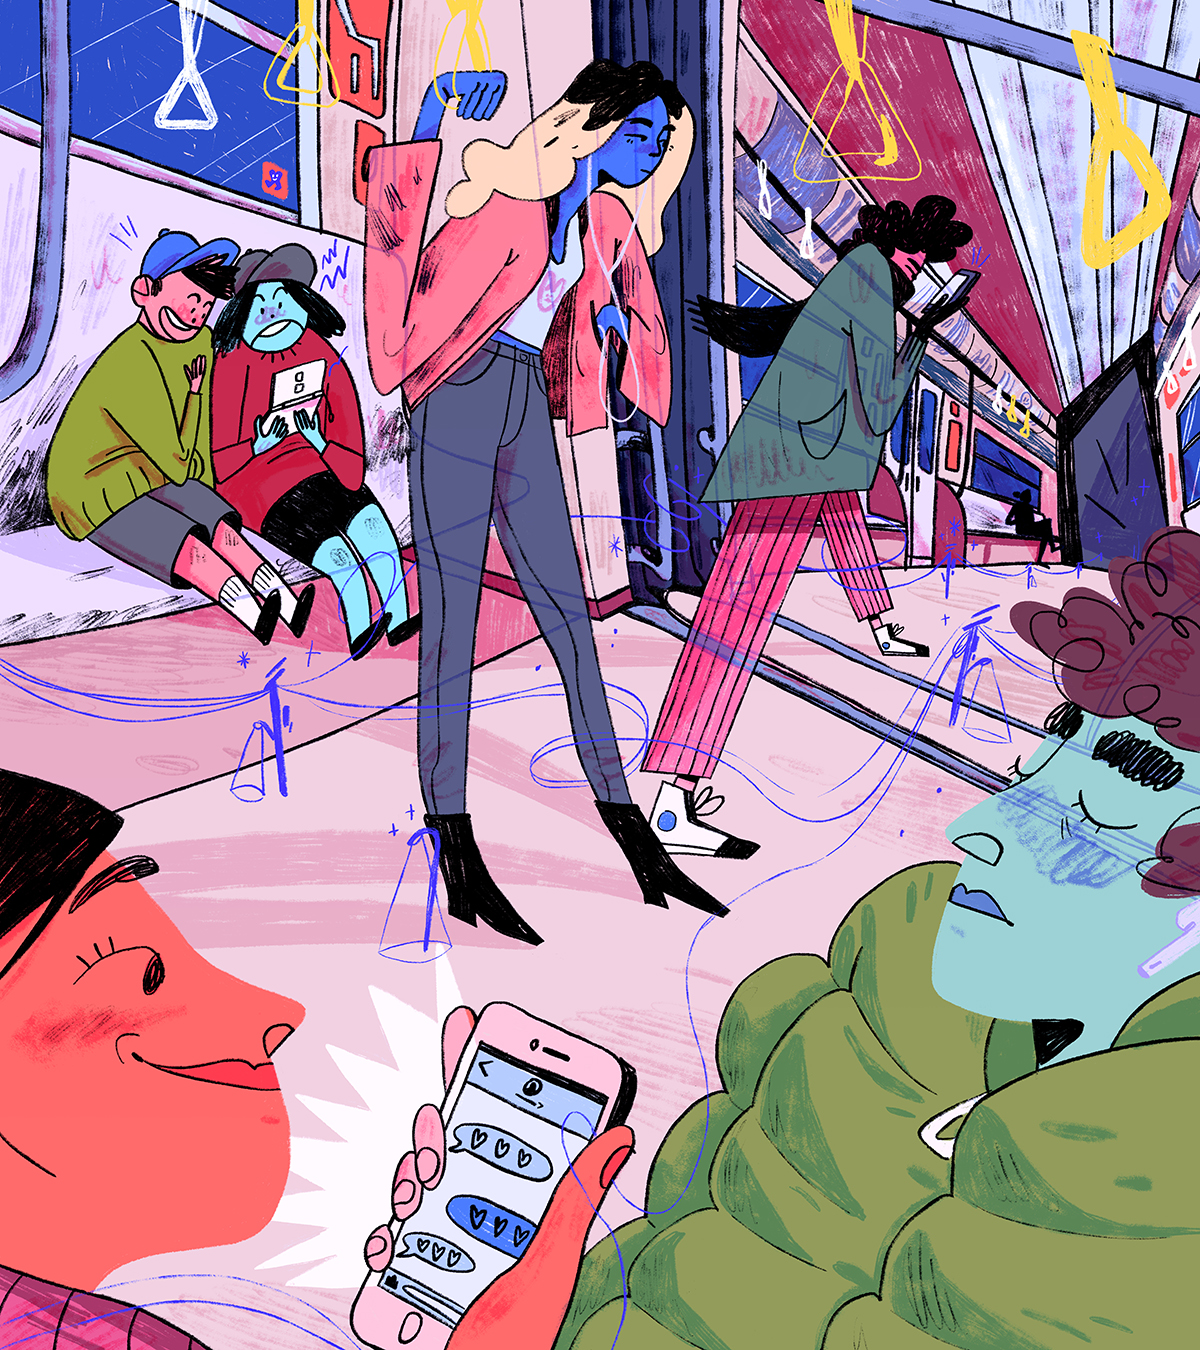 Colorful, bold illustration of a people on public transportation, woman in foreground holding cellphone smiling at messages